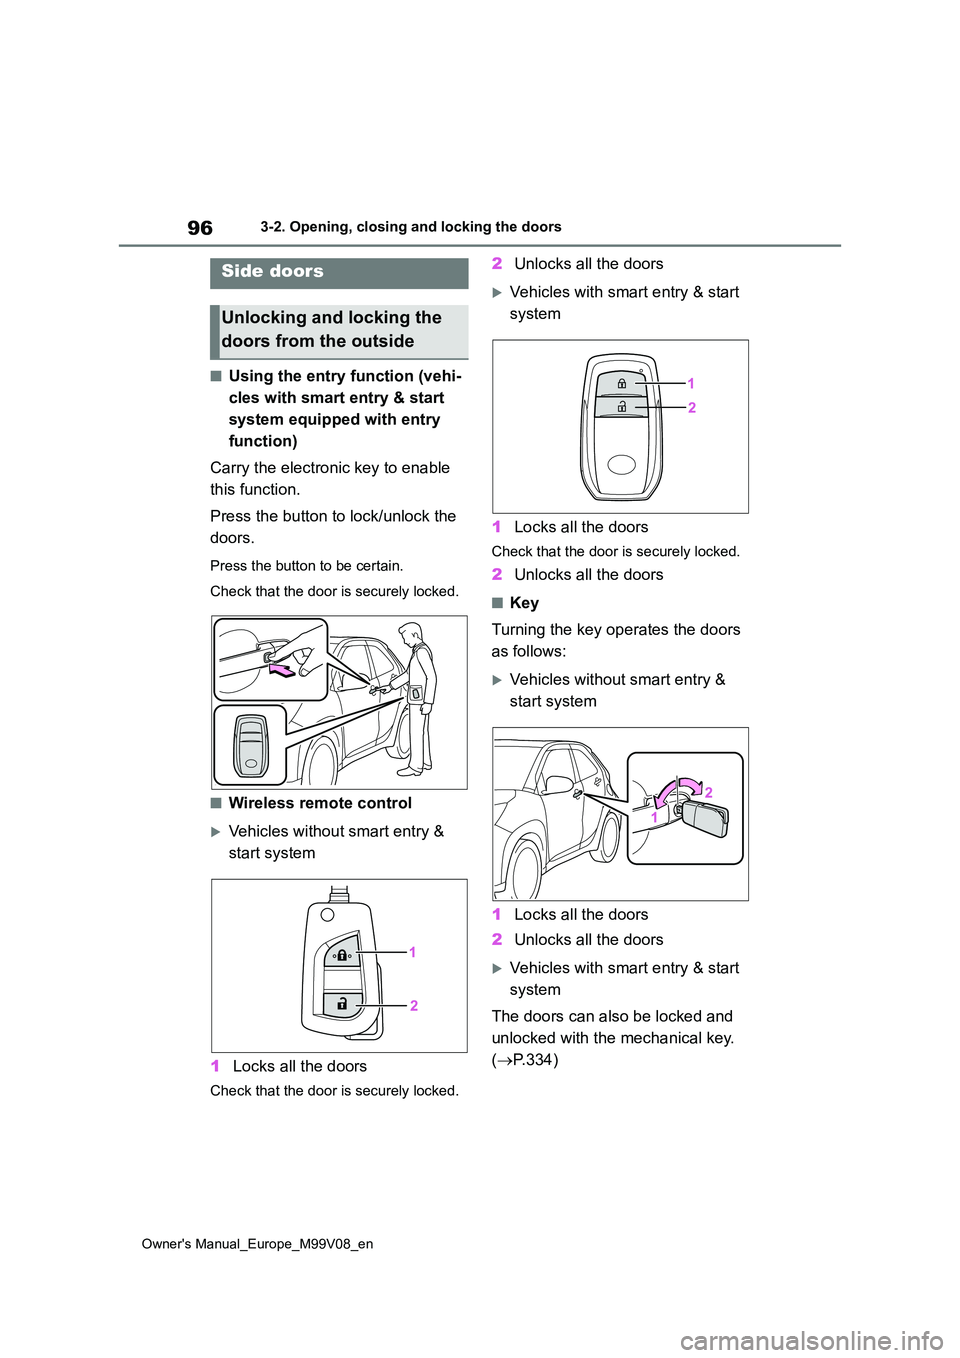 TOYOTA AYGO X 2022  Owners Manual (in English) 96
Owner's Manual_Europe_M99V08_en
3-2. Opening, closing and locking the doors
3-2.Opening, closing and lo cking th e d oors
■Using the entry function (vehi- 
cles with smart entry & start  
sys